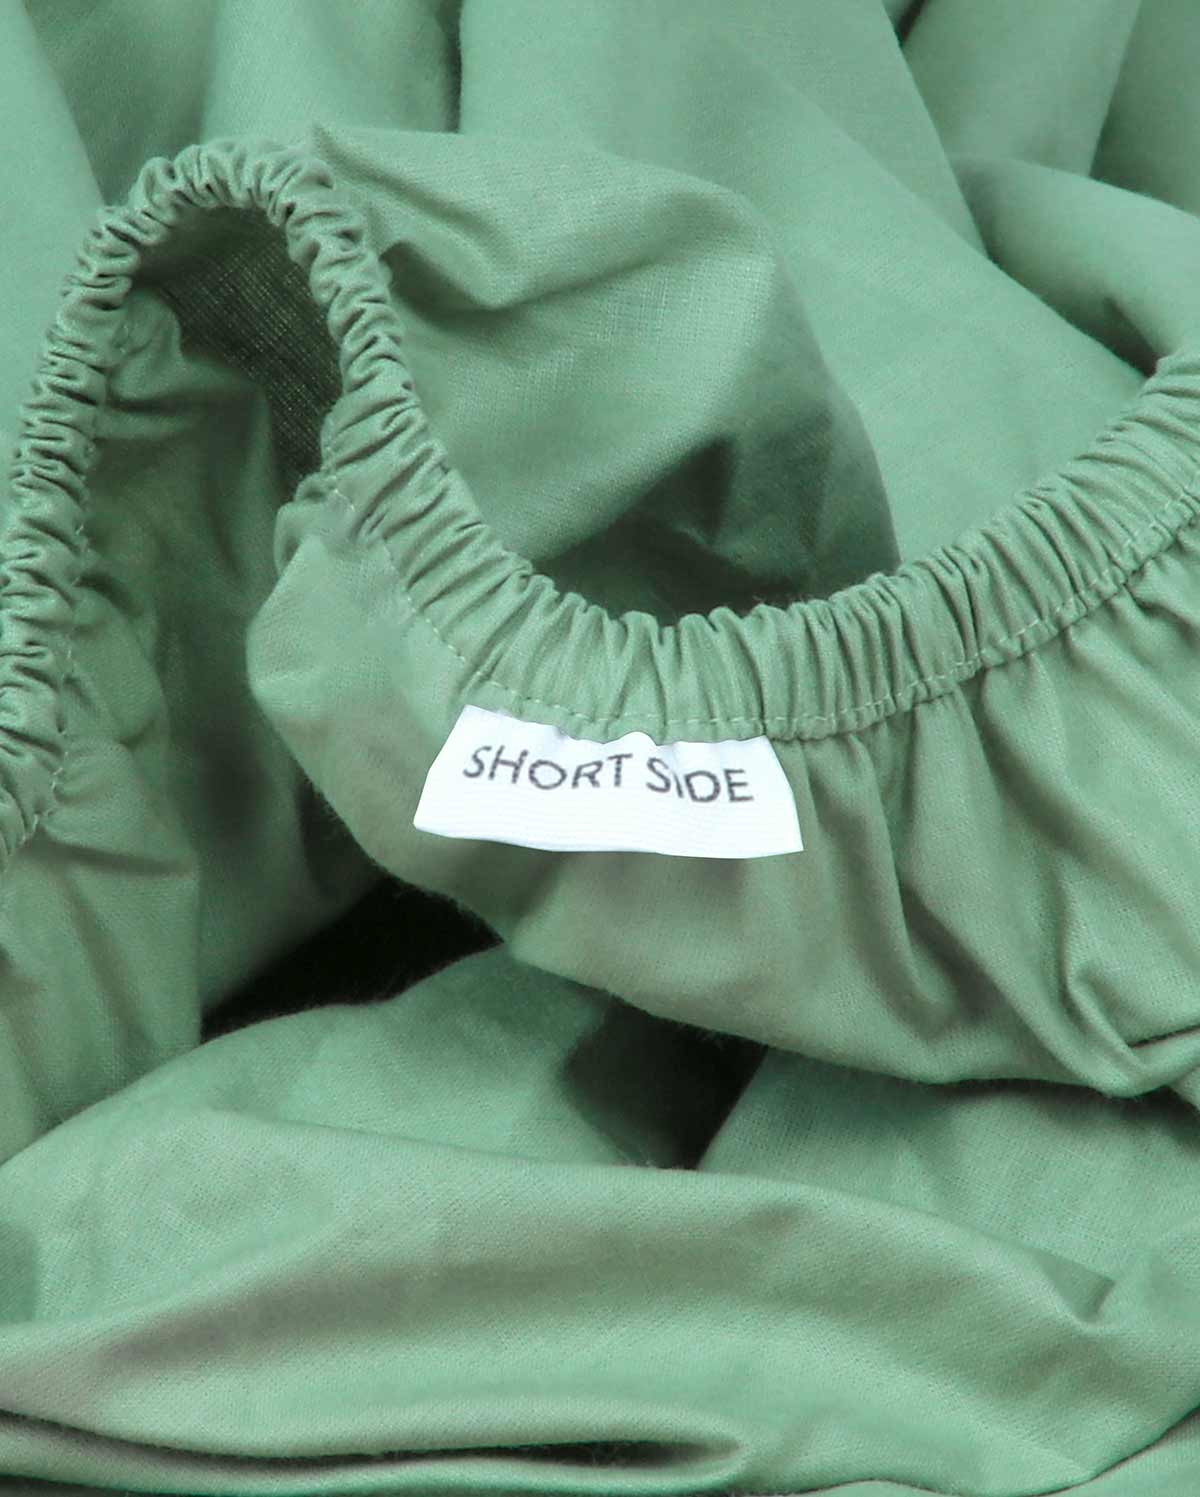 Classic Percale - Fitted Sheet Set- Jade Green with White Piped Edge